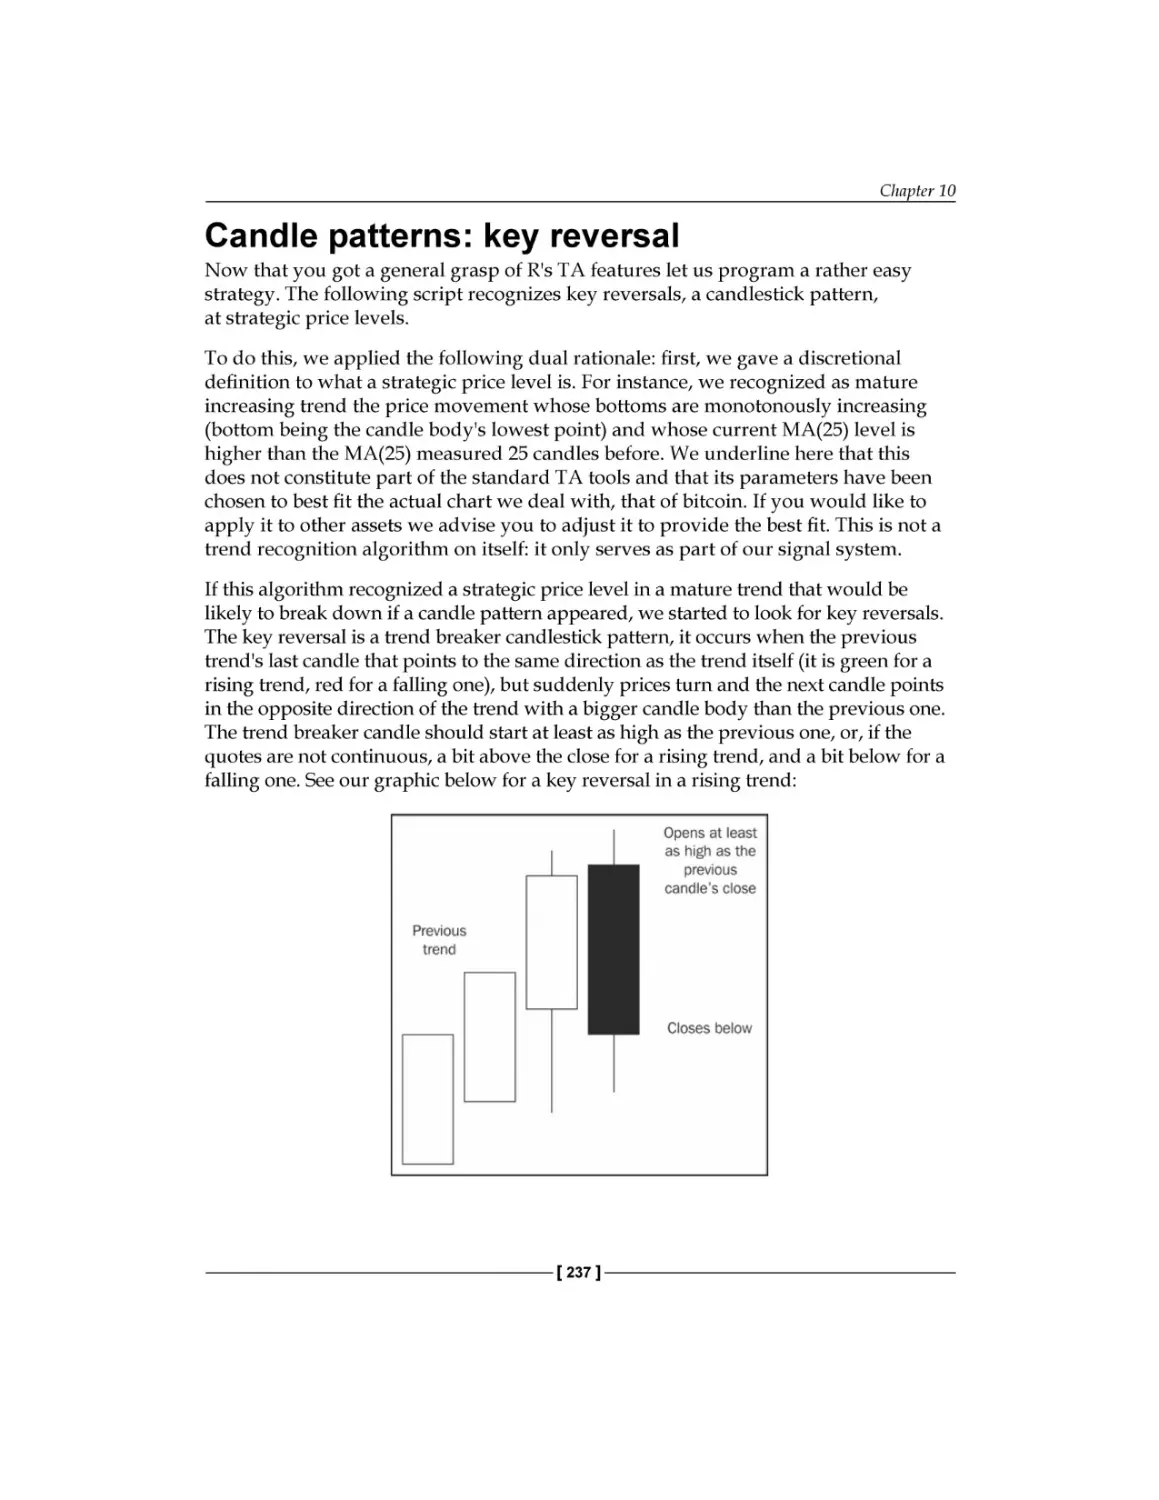 Candle patterns